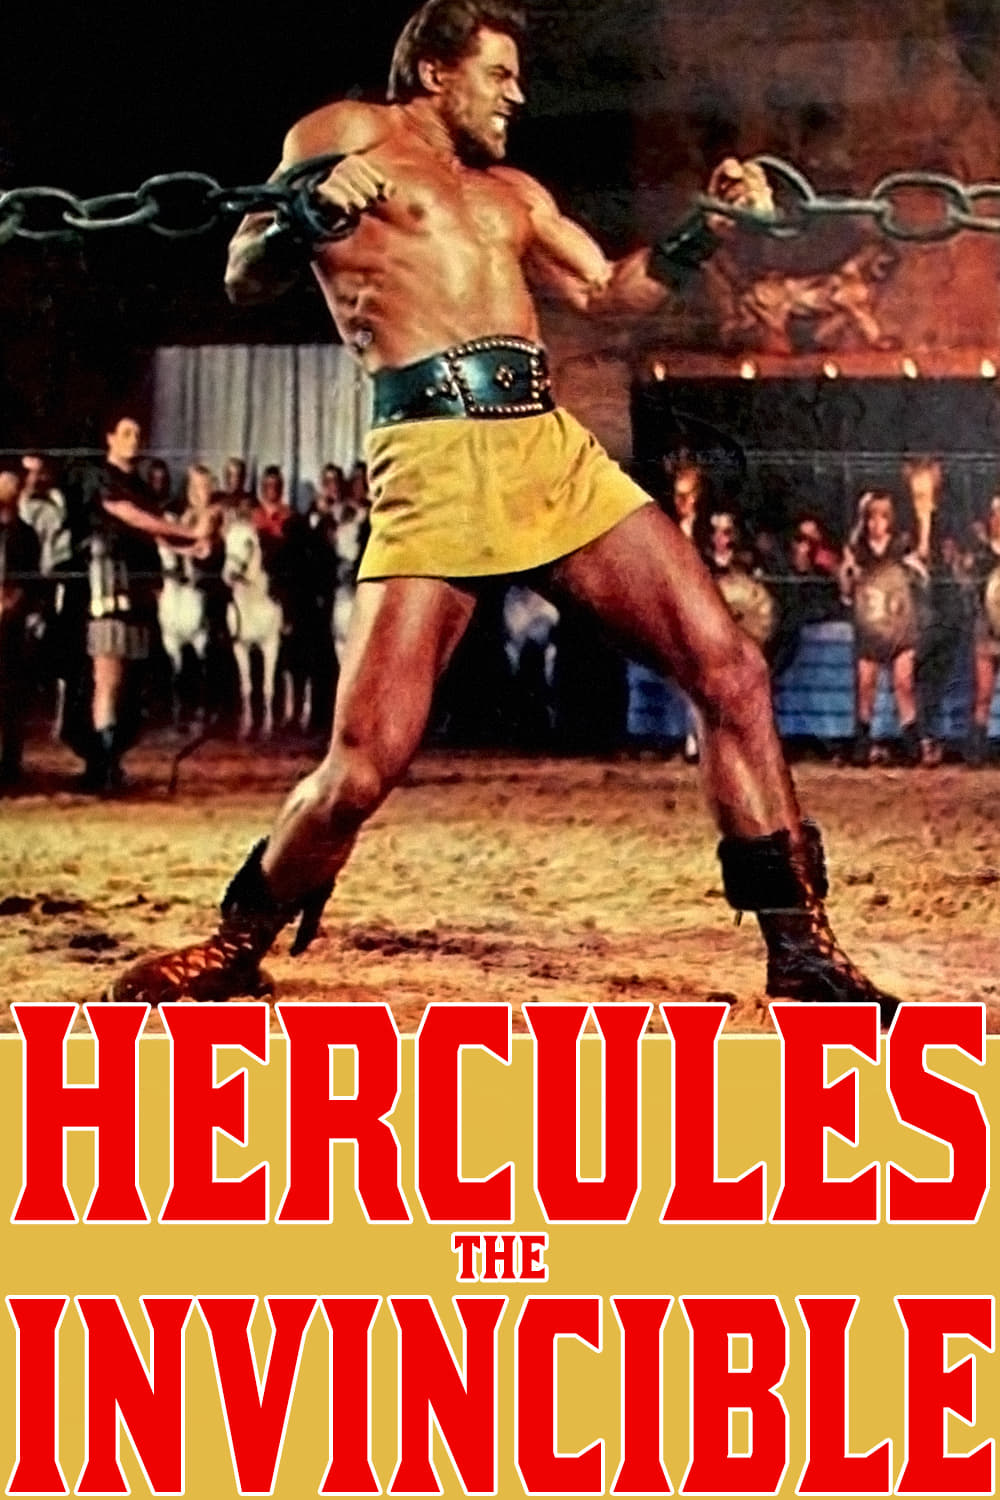 Son of Hercules in the Land of Darkness (1964)